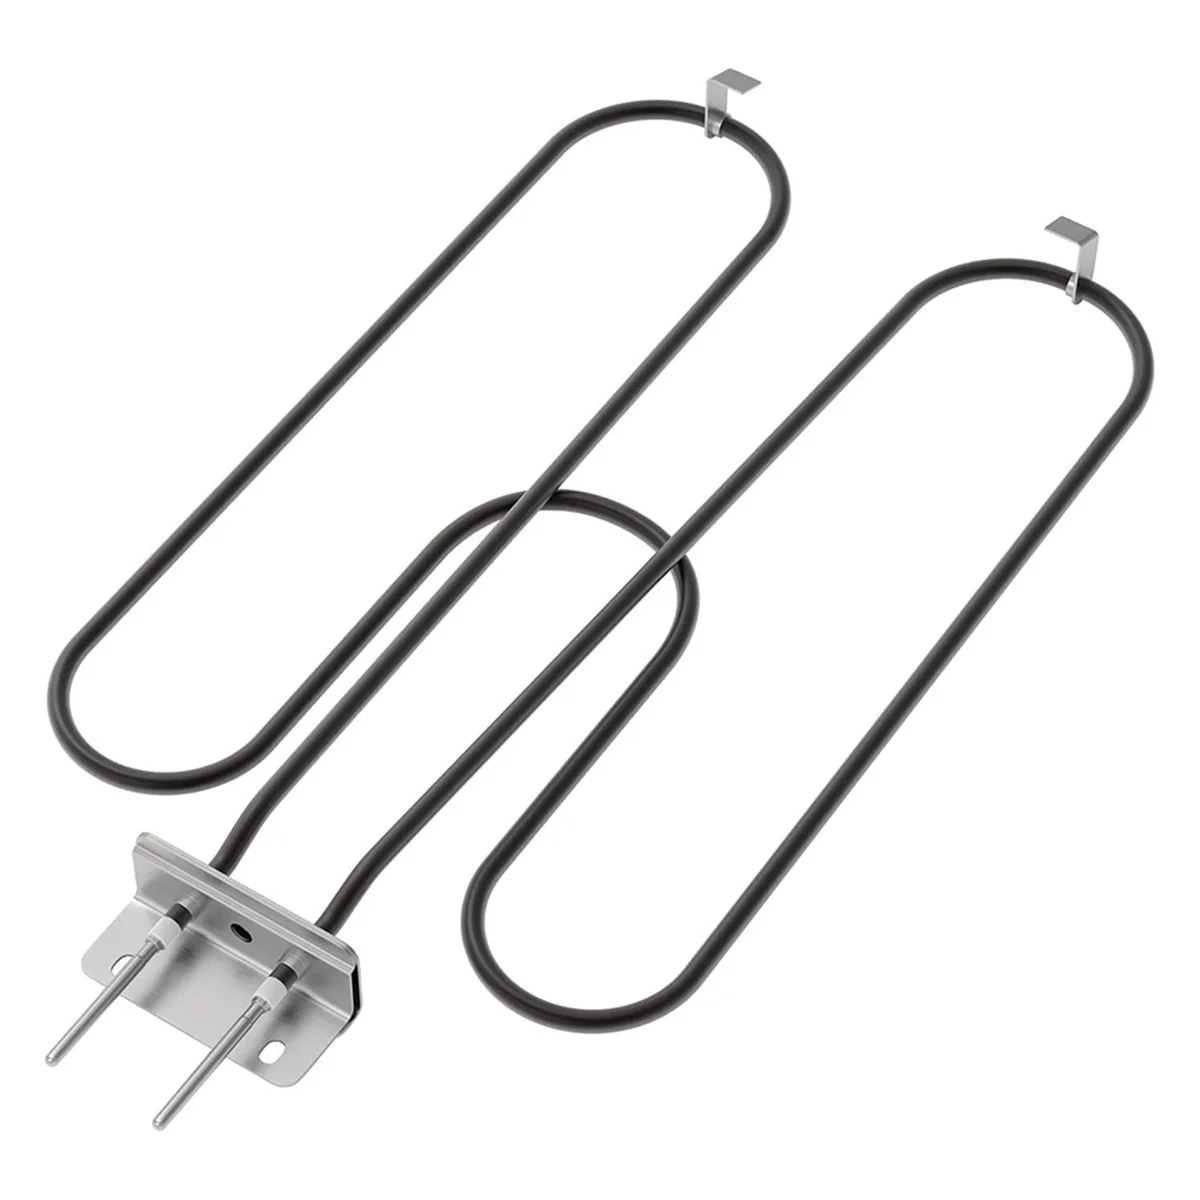 

70127 BBQ Grill Heating elements for Q240 Q2400 Grills, 55020001 Grills Replacement Part 230V 2200W